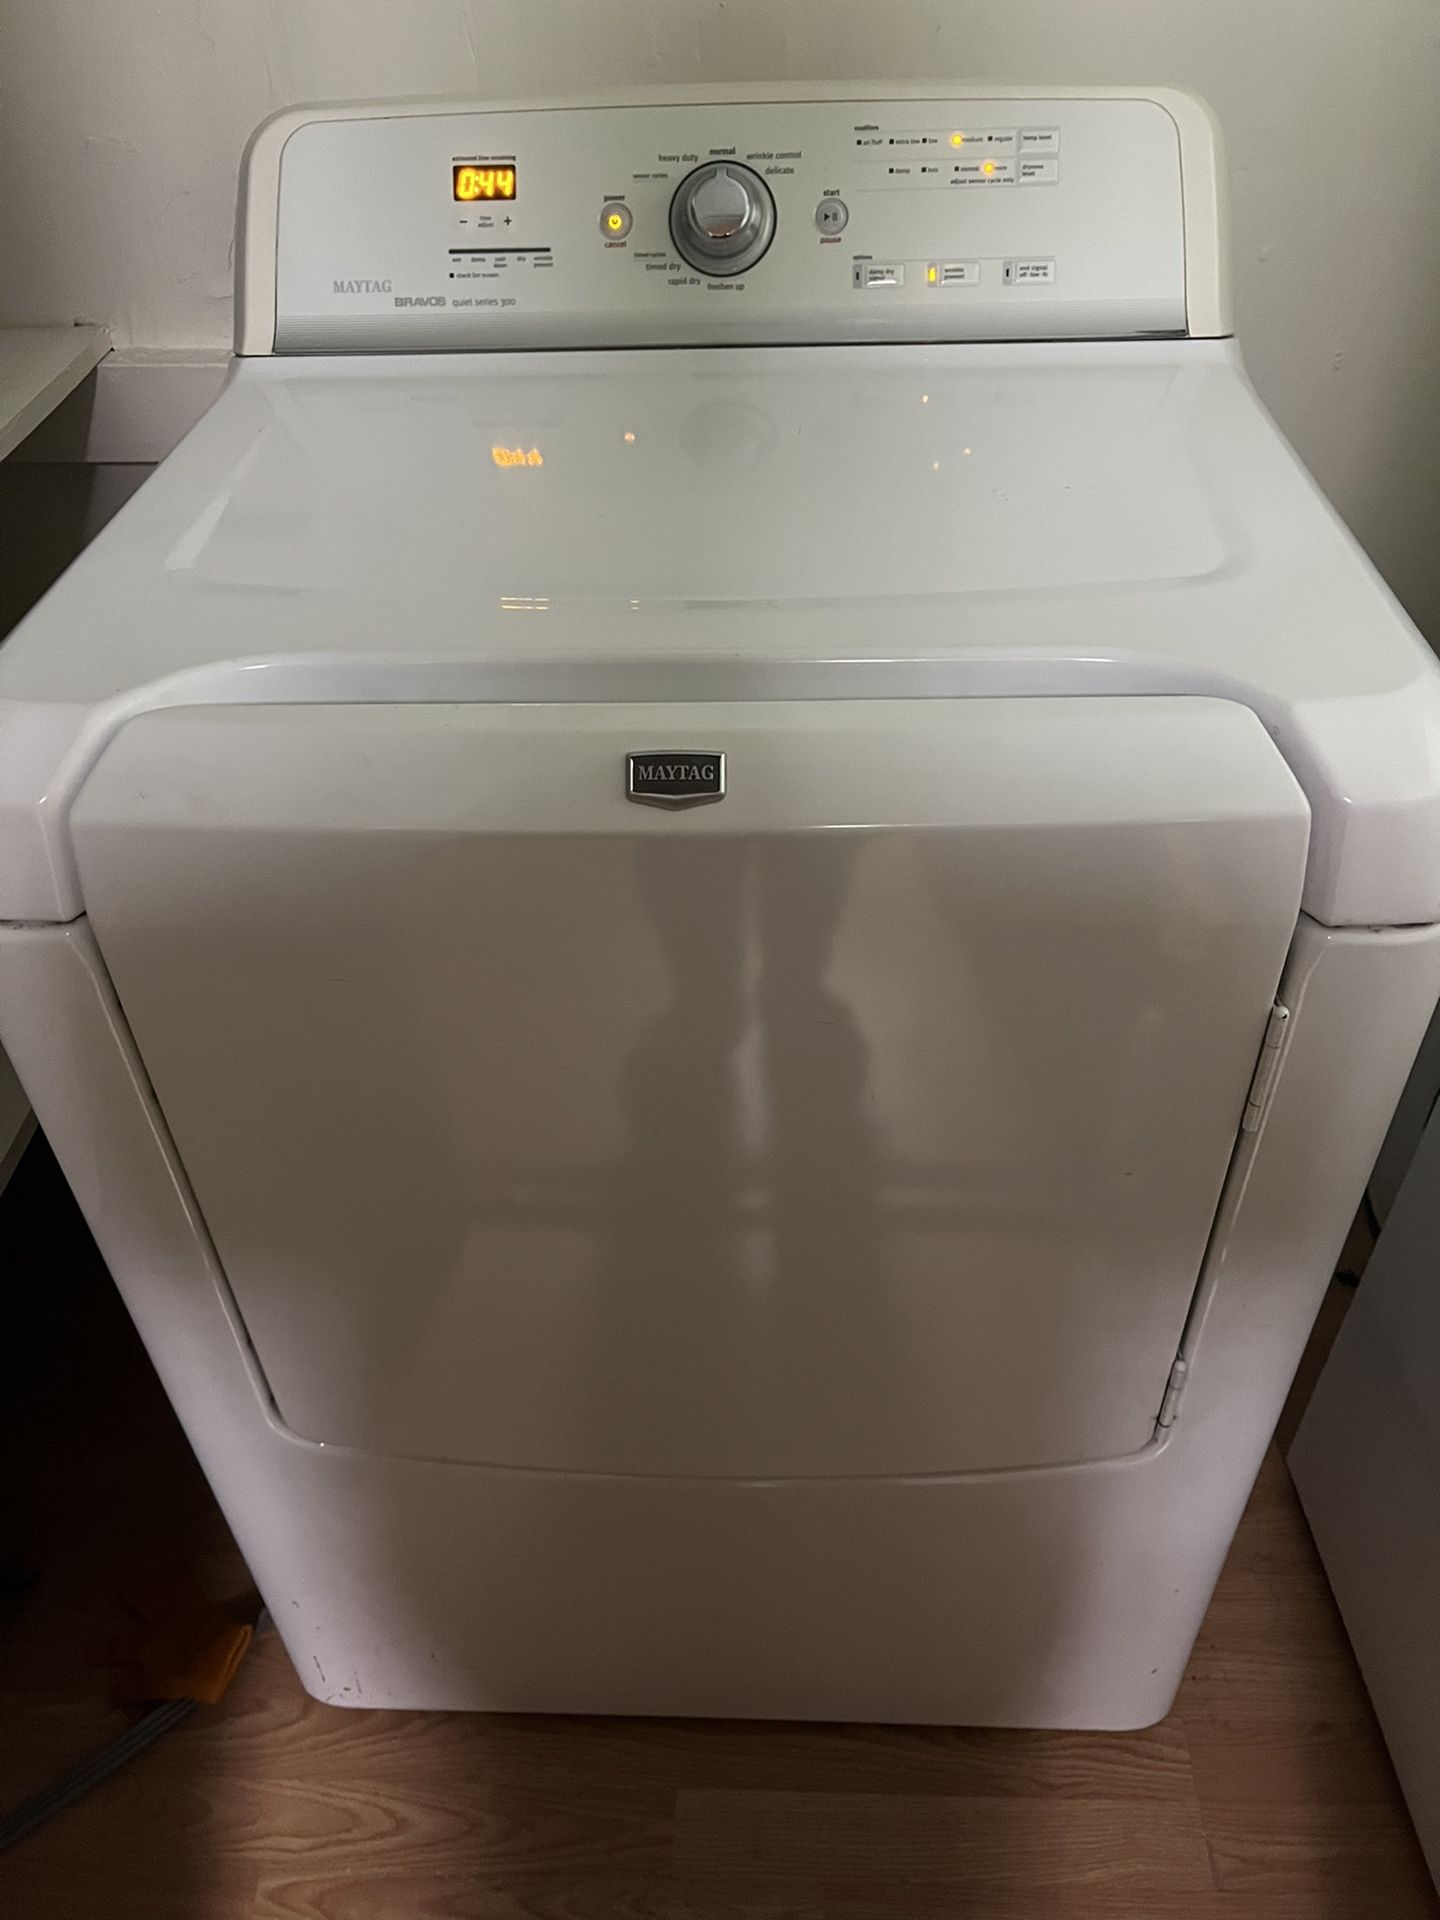 Maytag Washer And Dryer Quiet Series